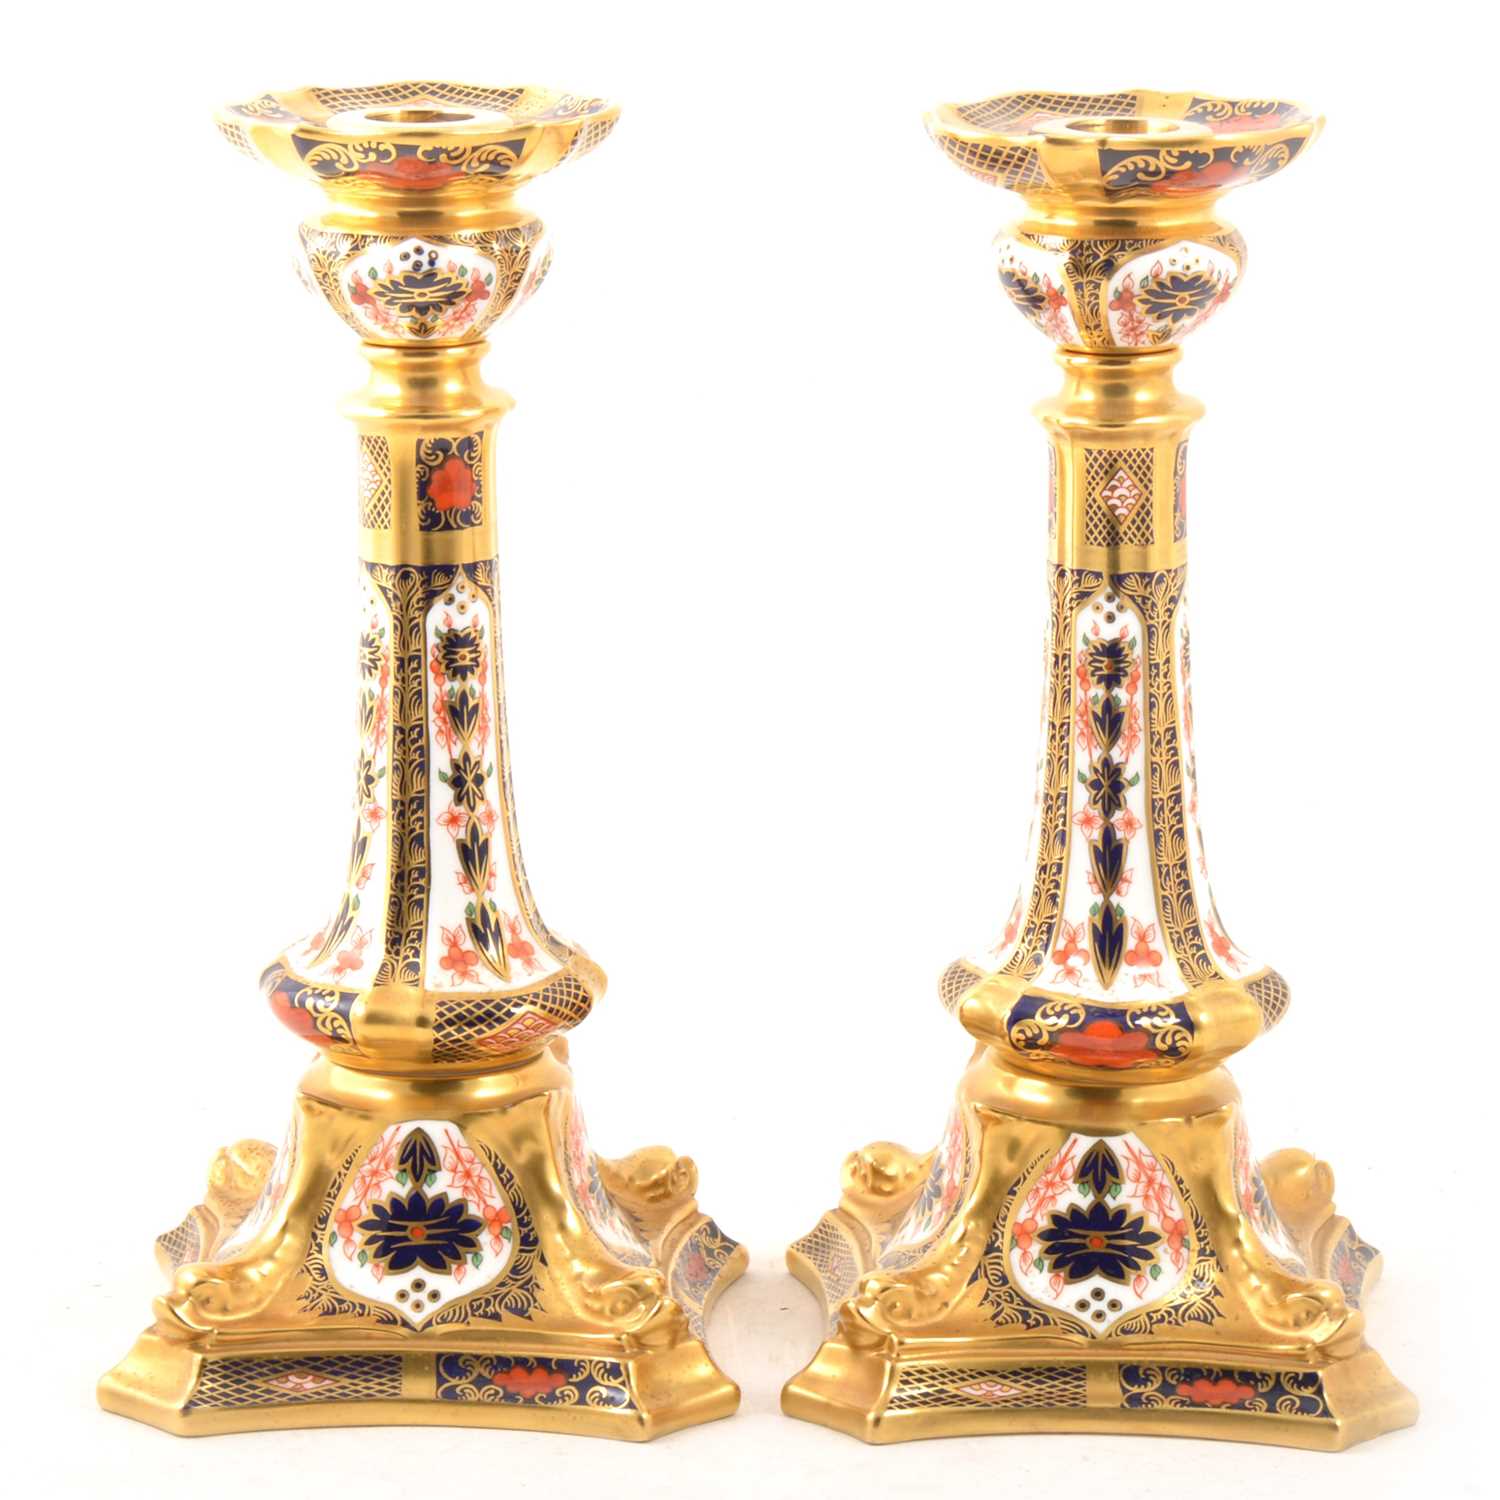 Lot 26 - Pair of Royal Crown Derby candlesticks